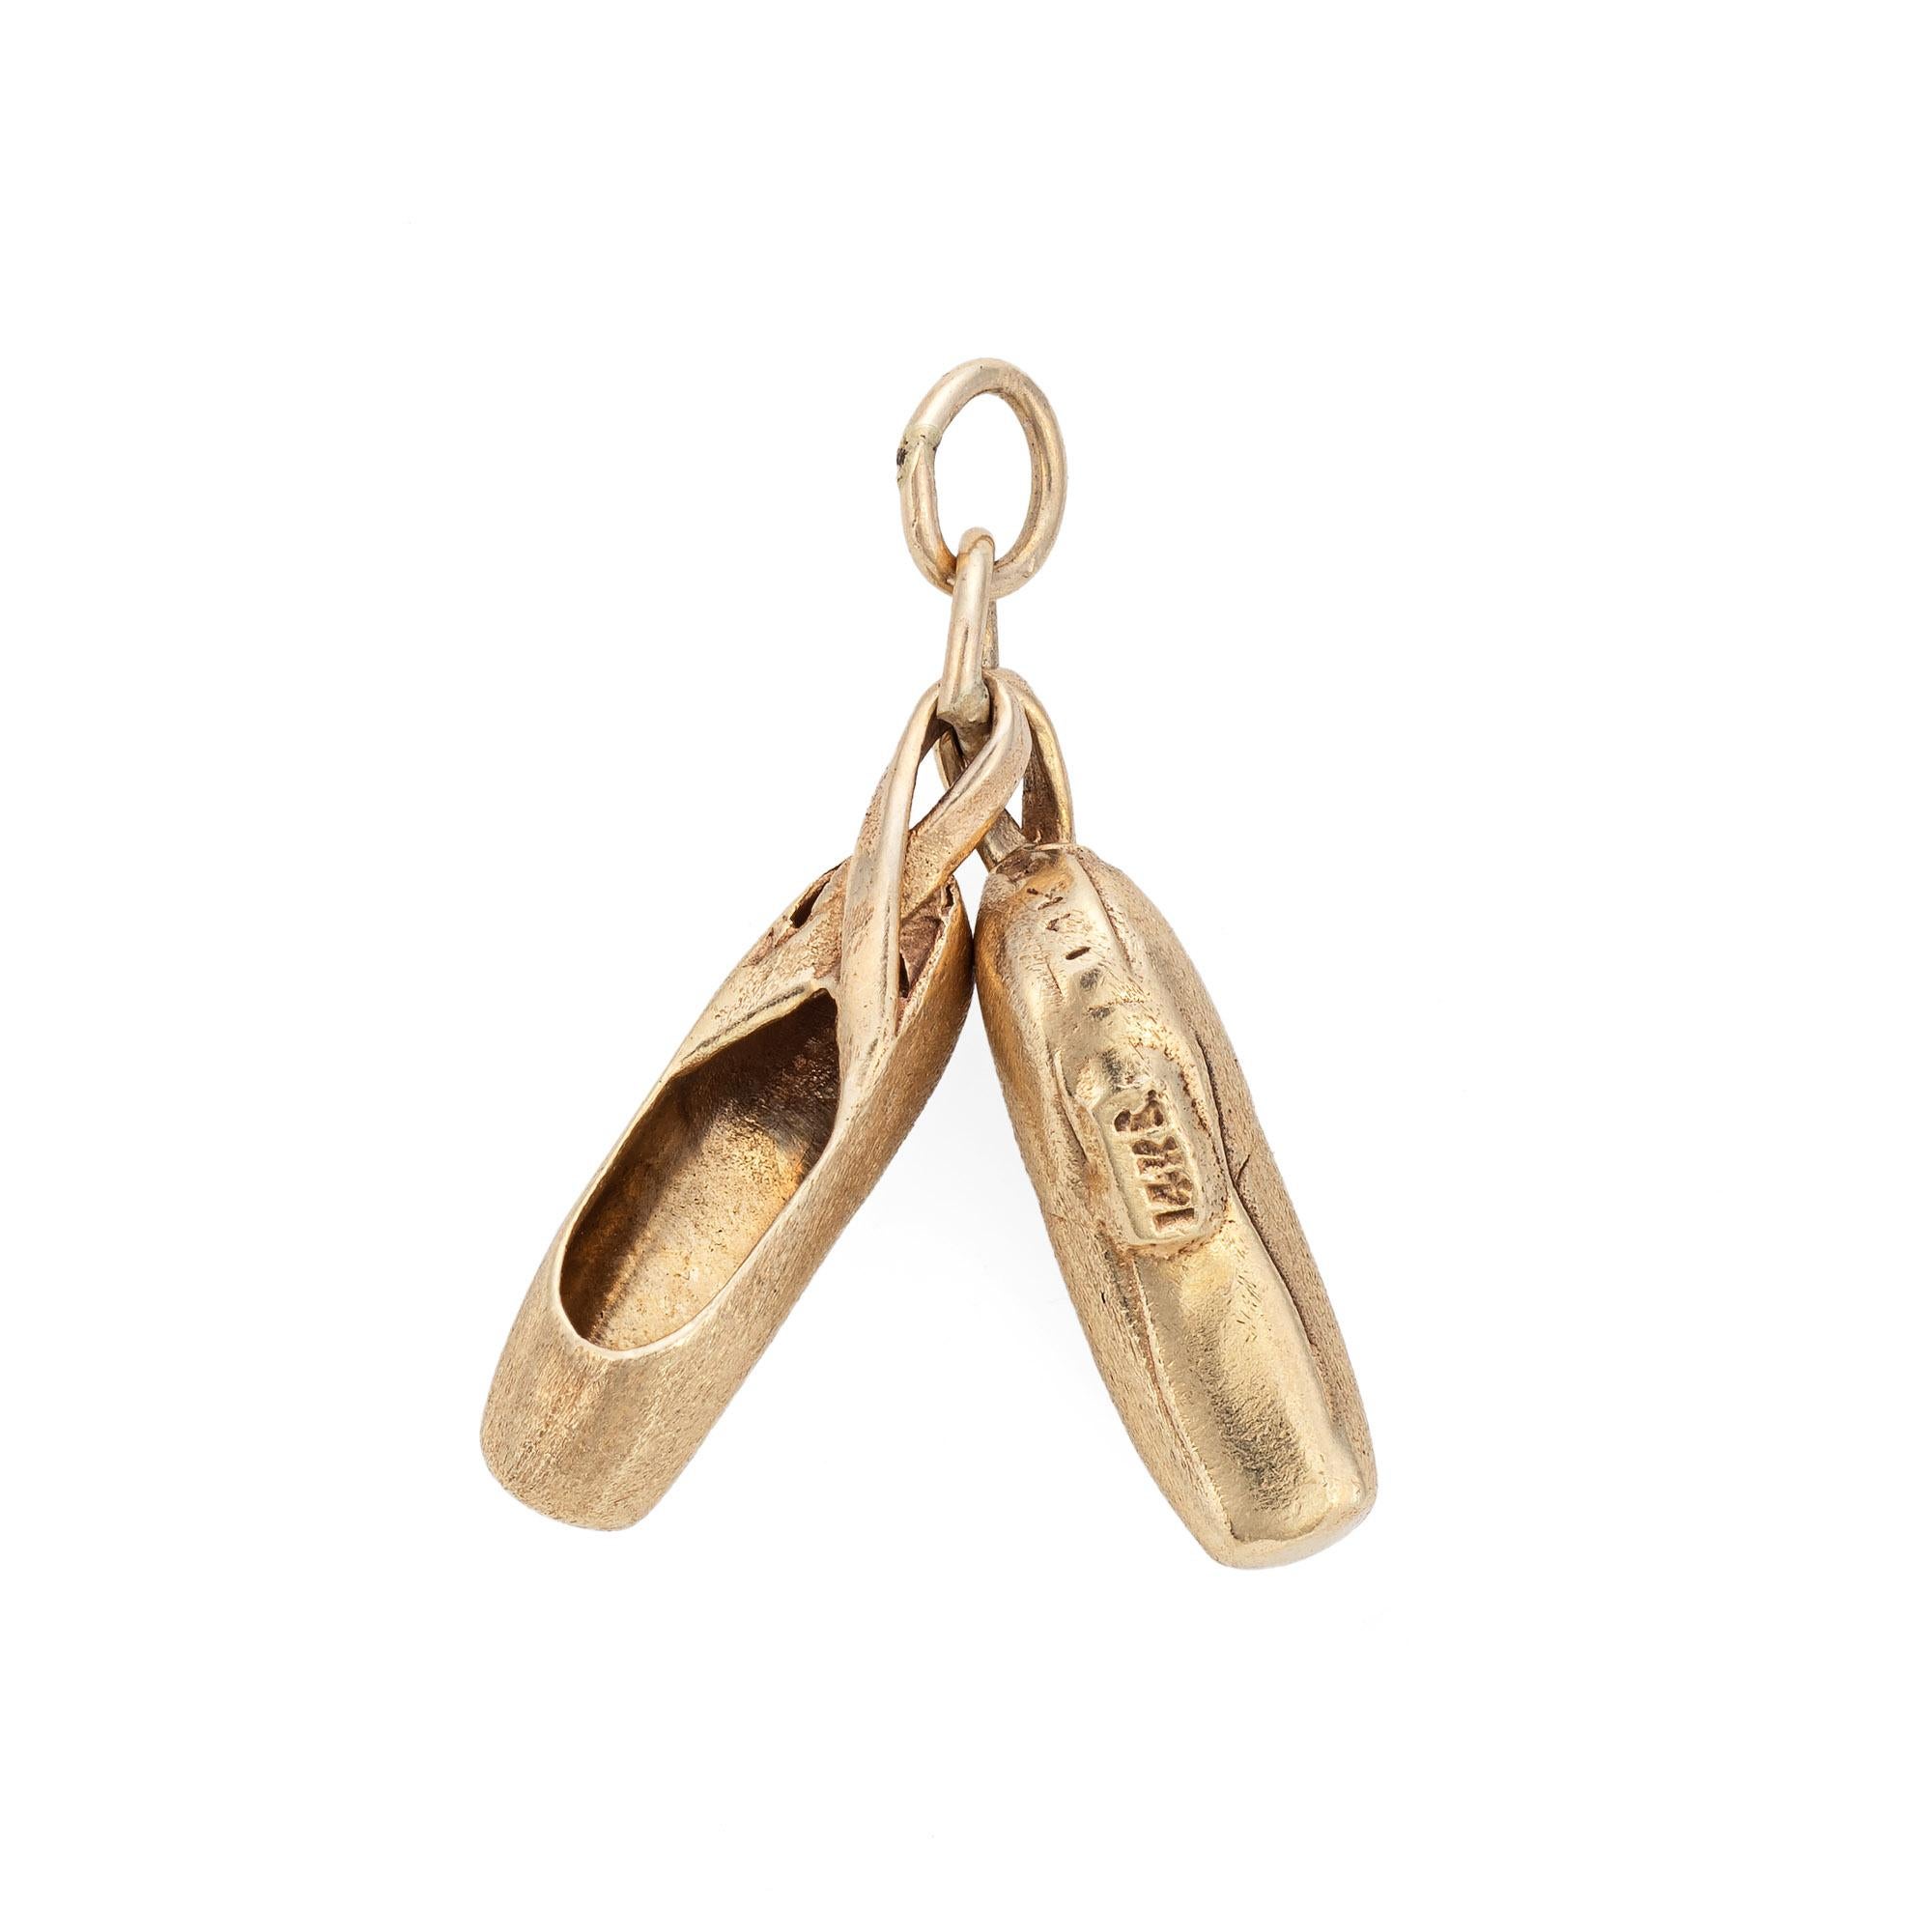 Finely detailed pair of vintage ballet slippers charm crafted in 14k yellow gold.  

The nicely detailed ballet slippers feature a satin finish for a muted gold effect. Small in scale the slippers are hollow and light to the touch at 2.8 grams.